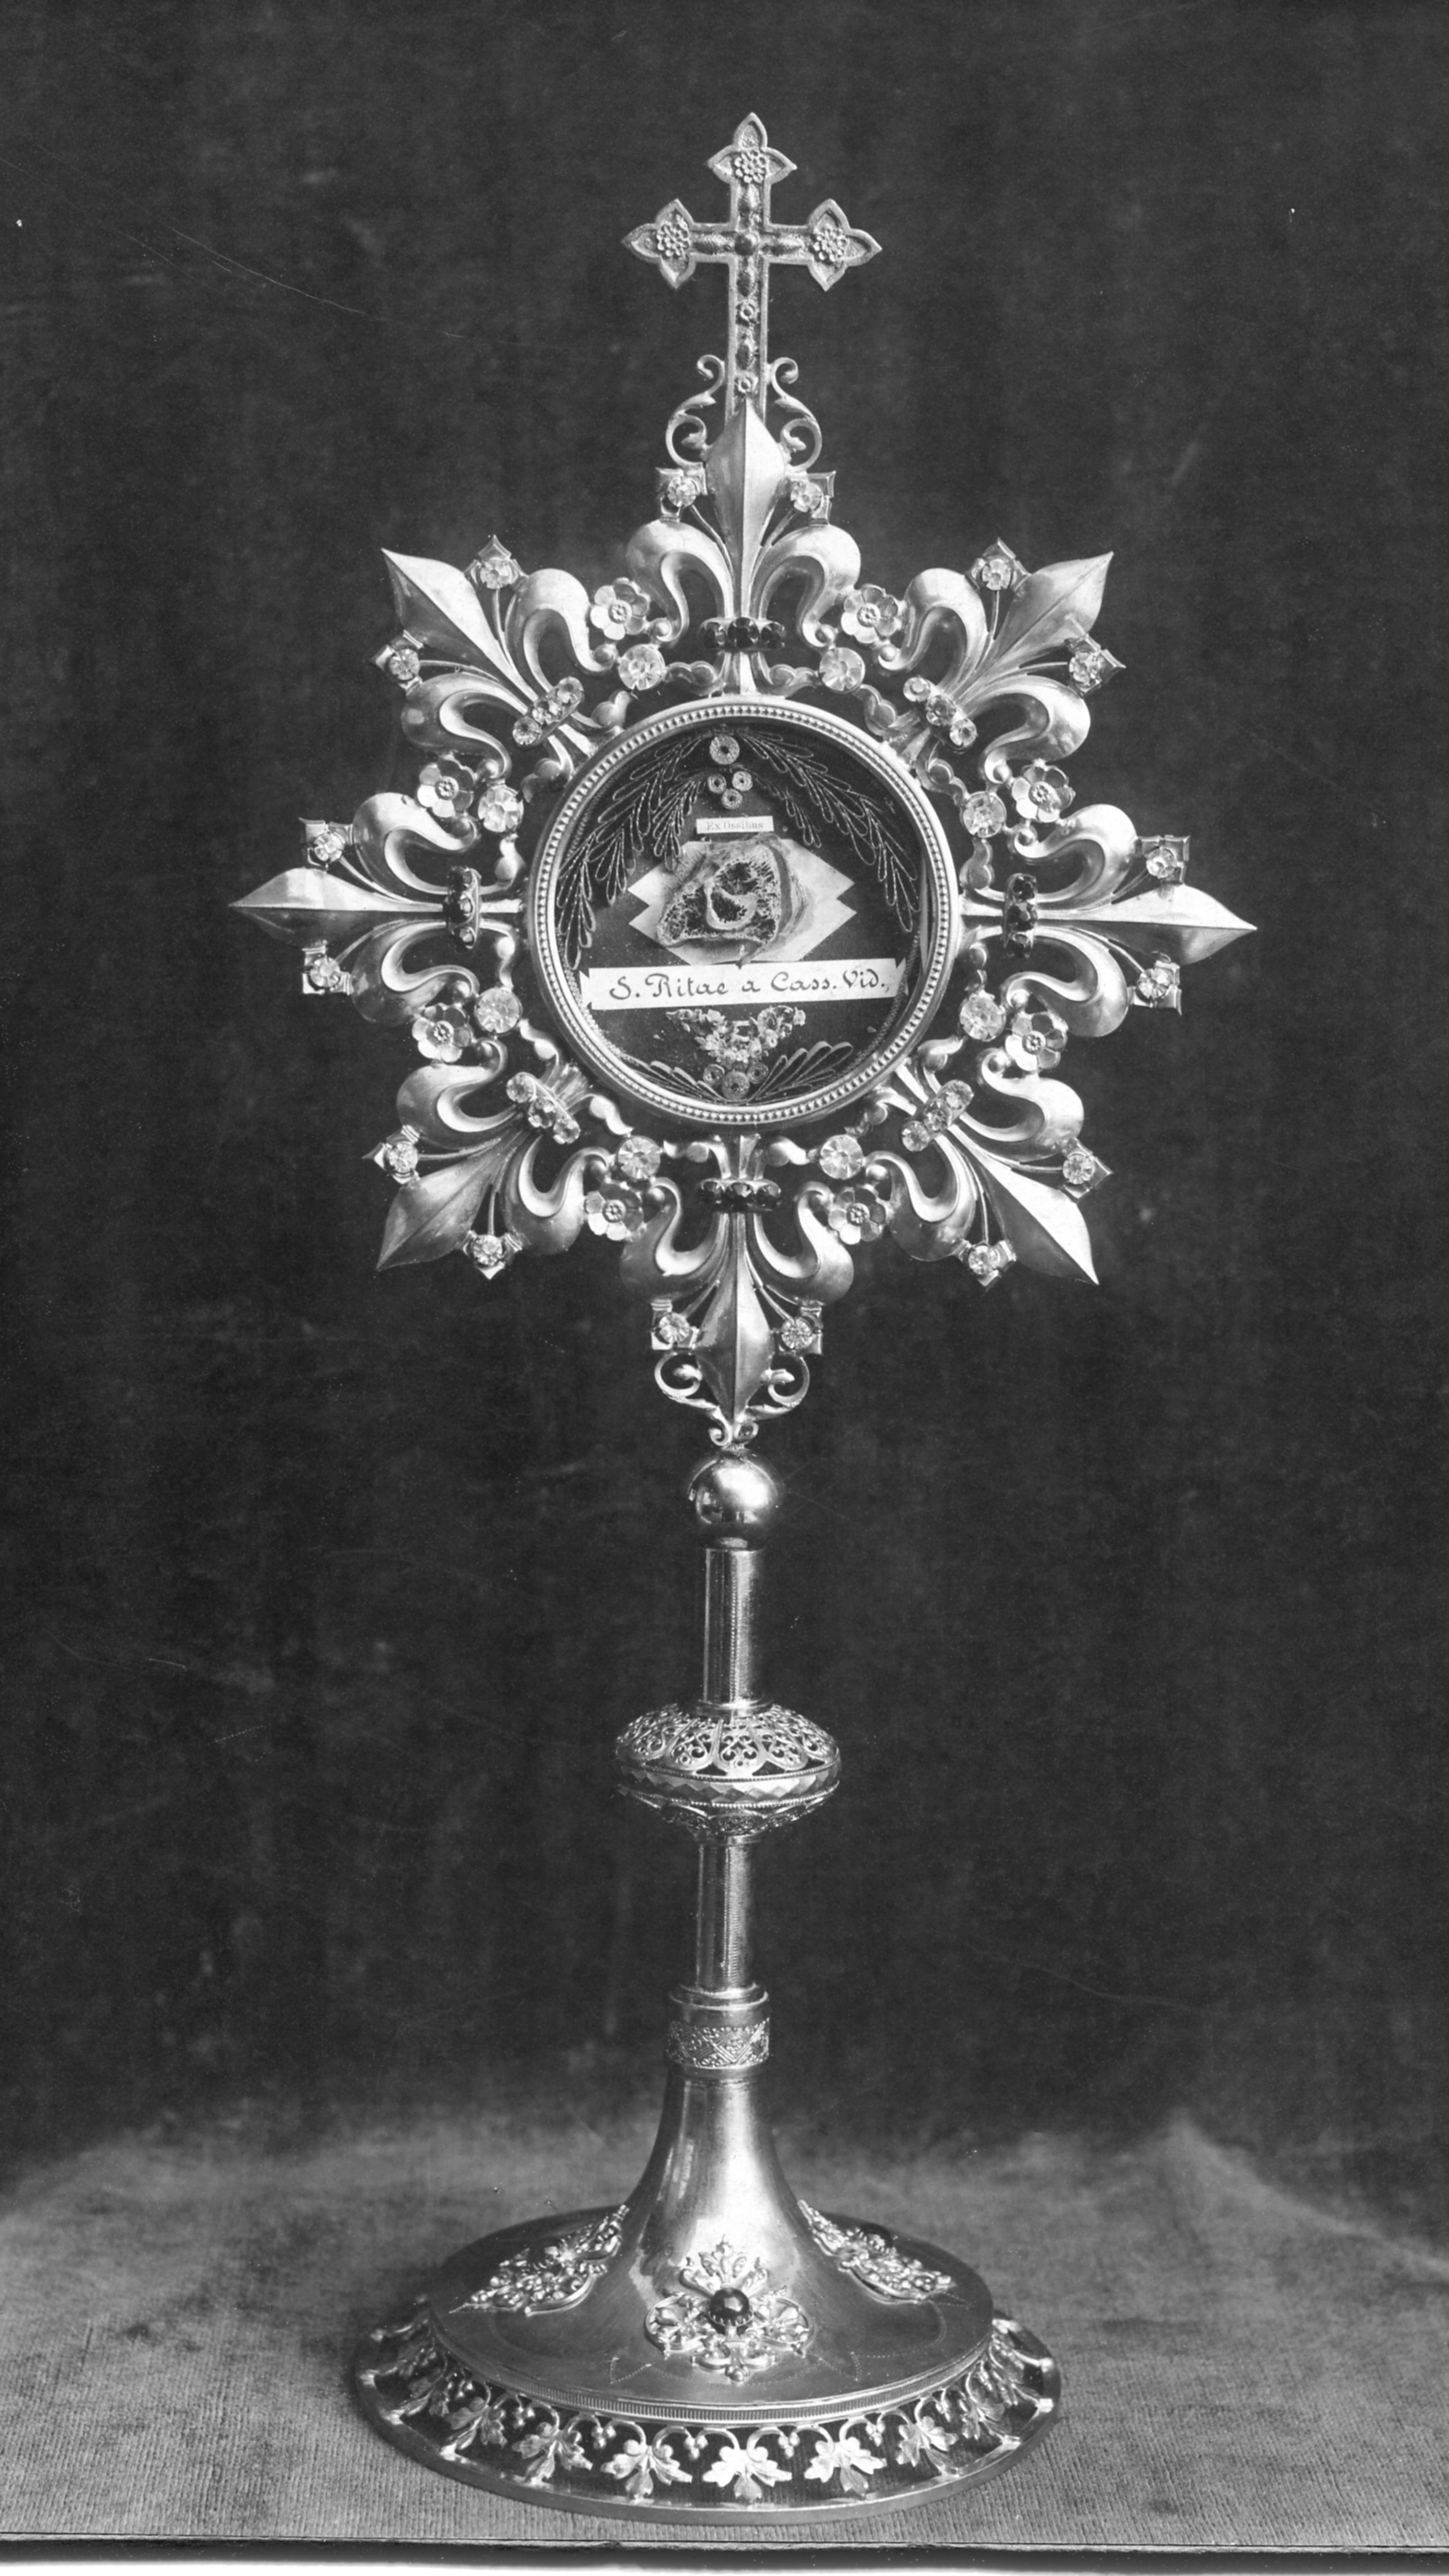 Early black & white photo of the relic of St. Rita of Cascia